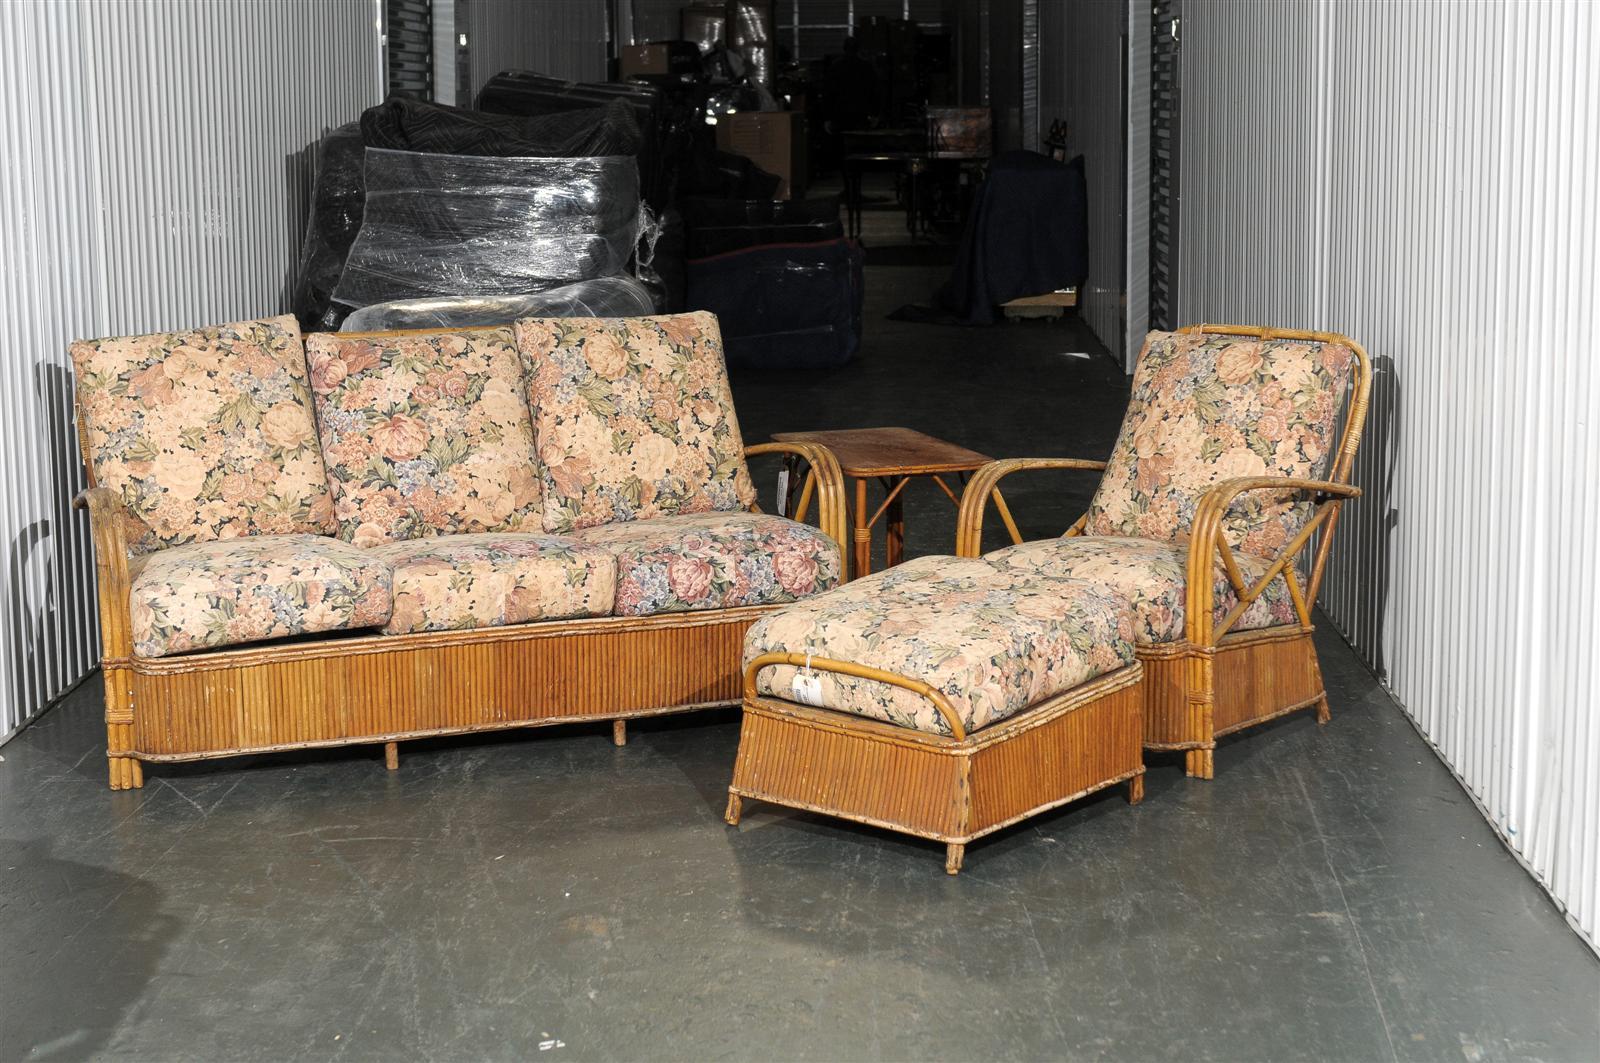 20th century five-piece rattan set in the style of Frankl
Measures: Frankl sofa 64.75